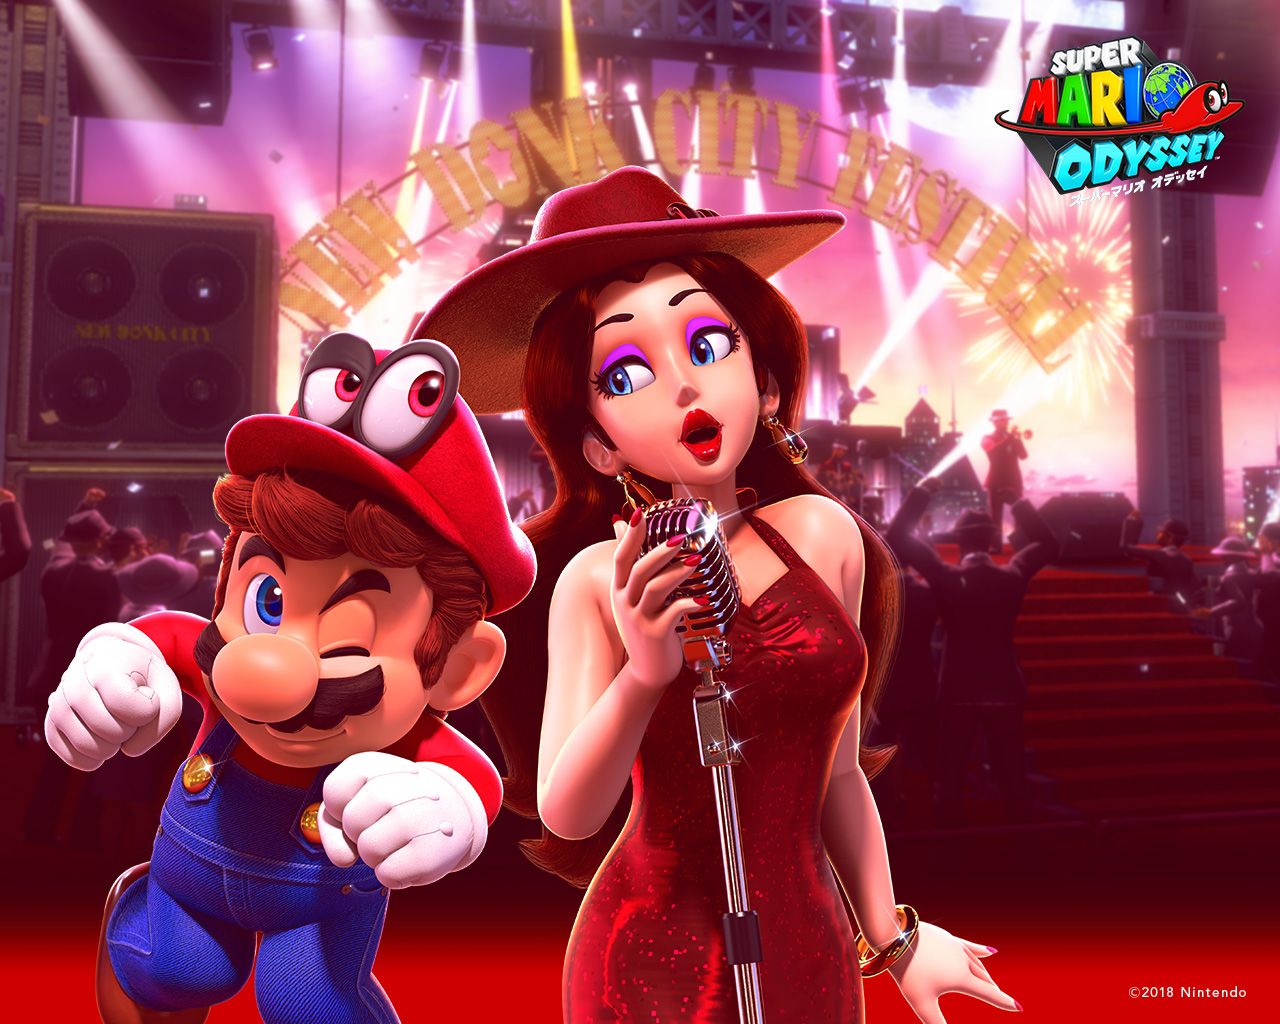 Download The Super Mario Odyssey Happy Birthday Wallpaper For Free